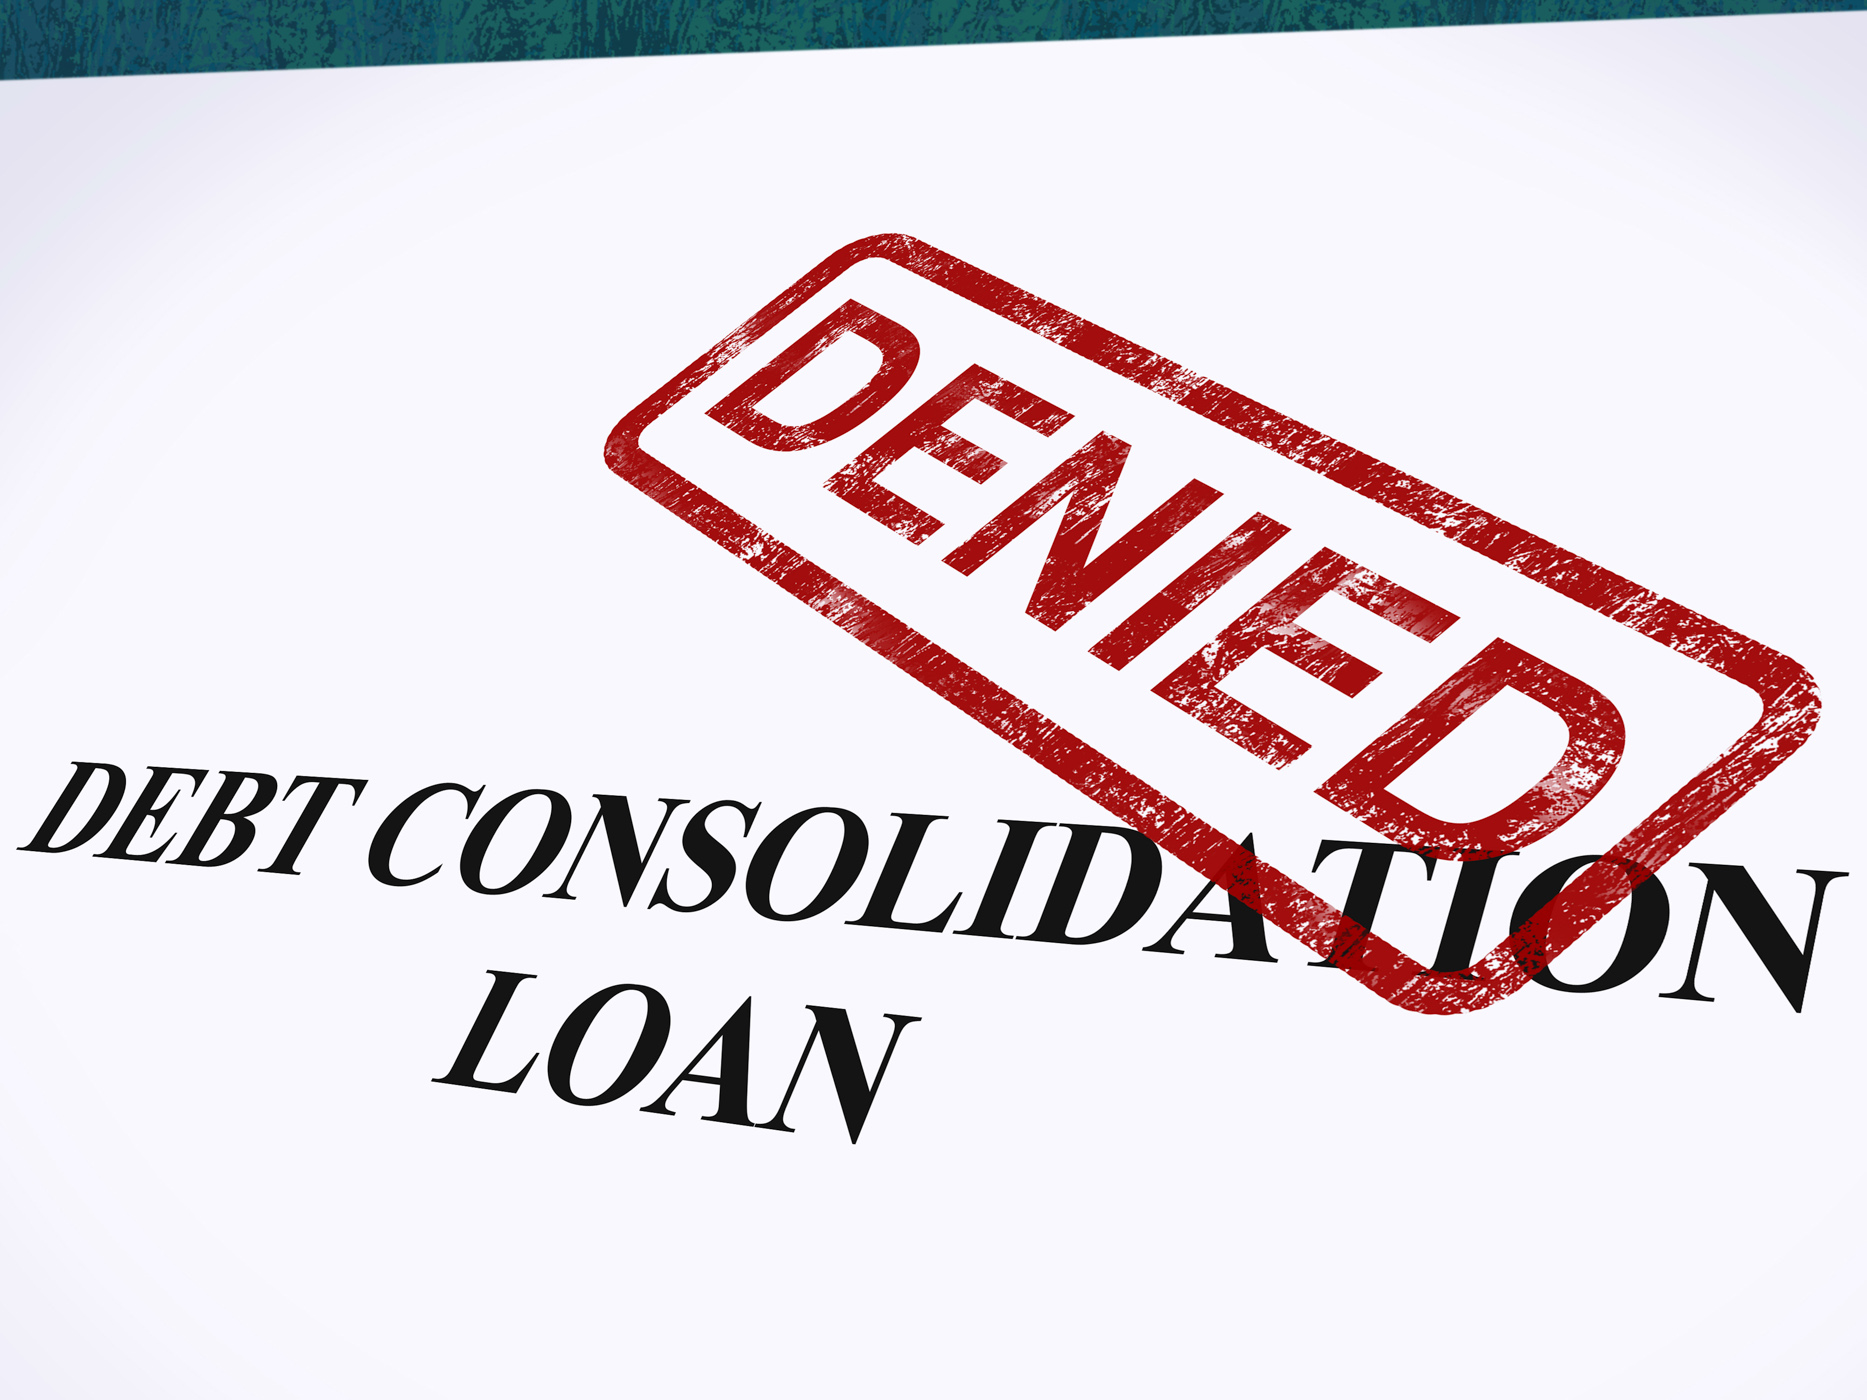 Debt Consolidation Loan Denied Stamp Shows Consolidated Loans Refused, Application, Rejection, Rejected, Reject, HQ Photo